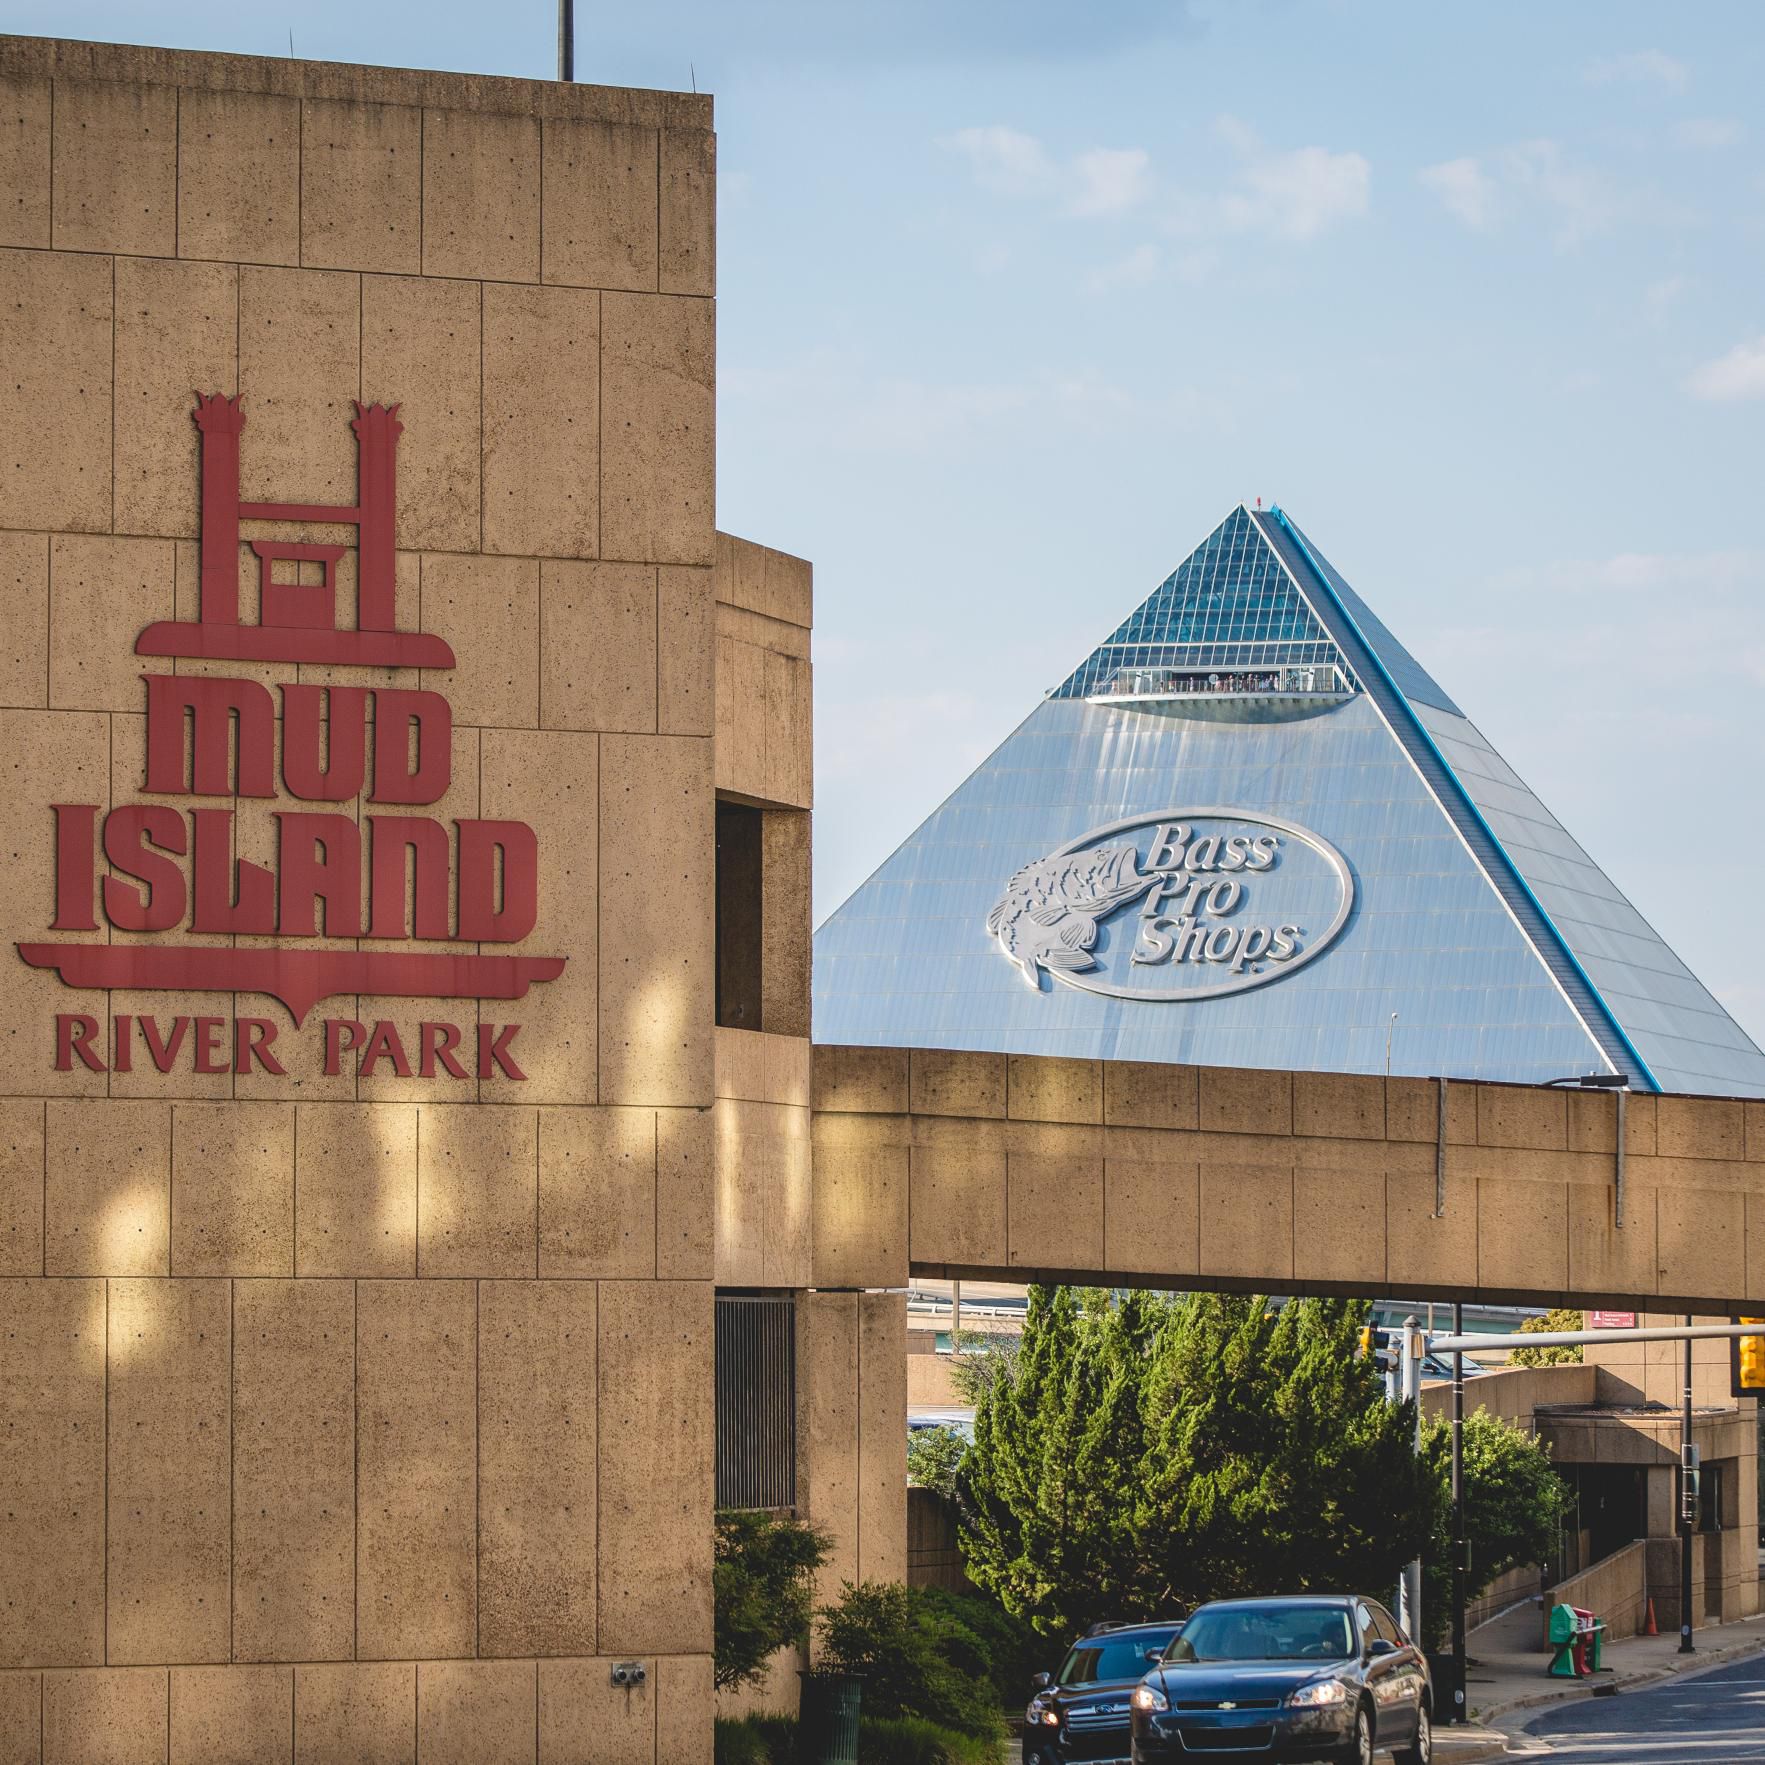 Spend the day at Mud Island River Park and Bass Pro shop